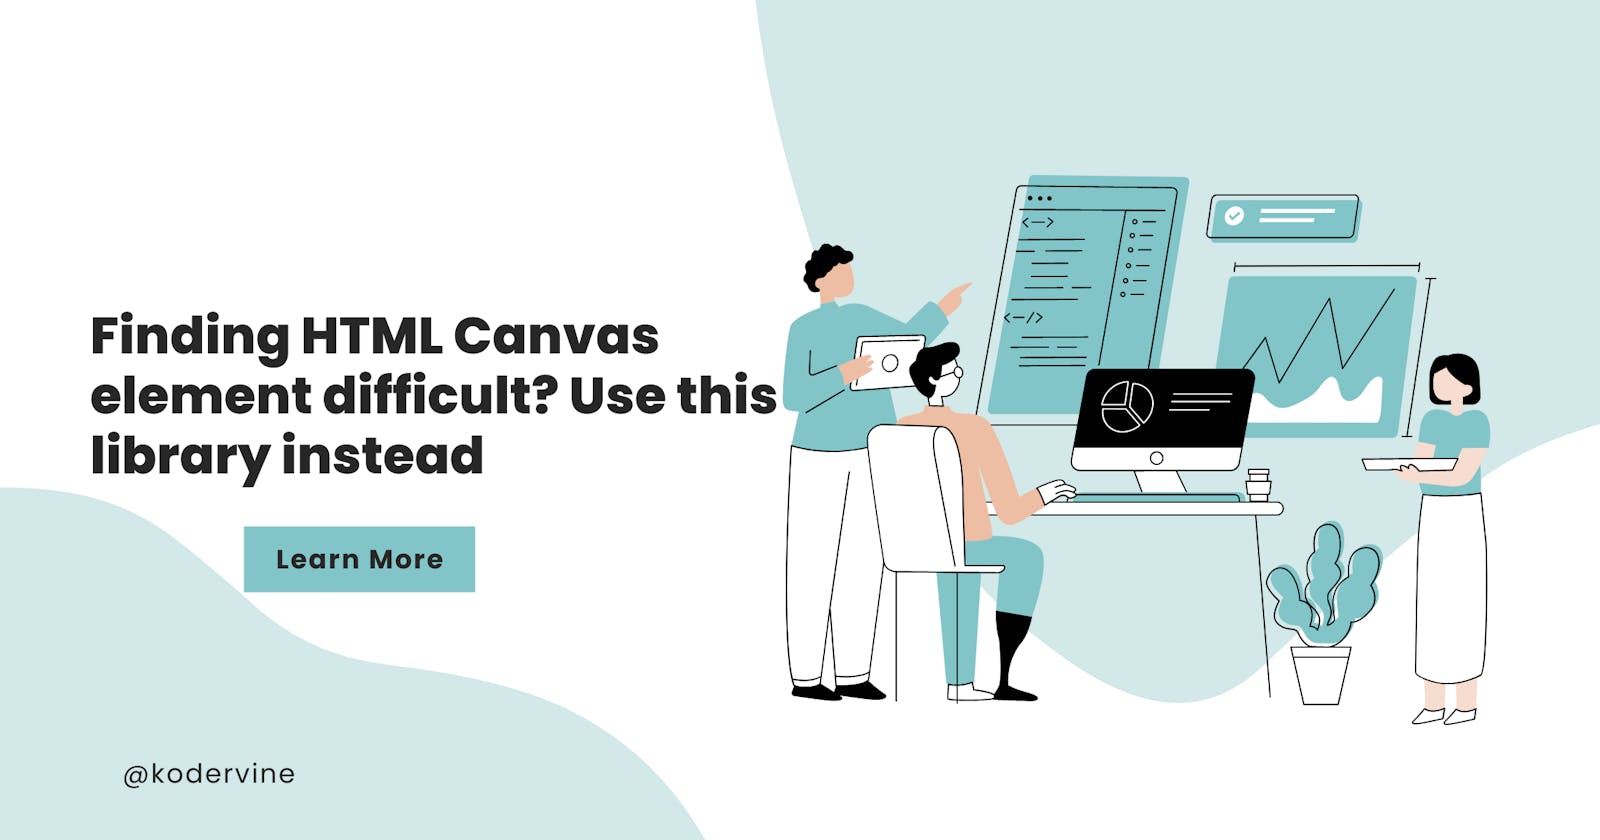 Finding HTML Canvas element difficult? Use this library instead